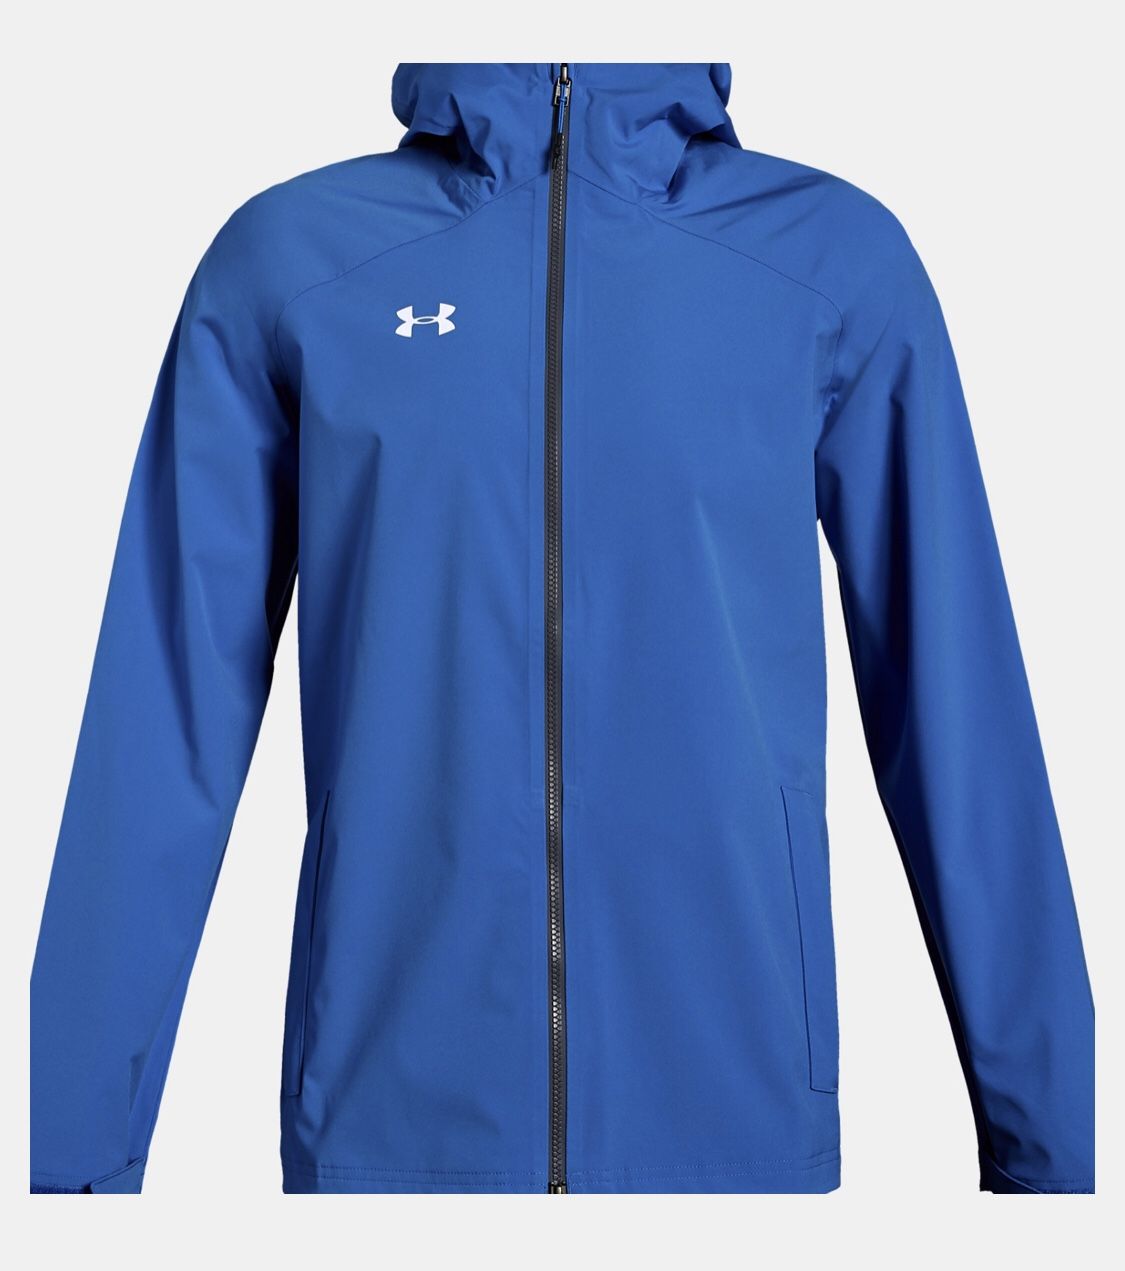 Under Armour Storm Bora Jacket Waterproof Size Large & Small